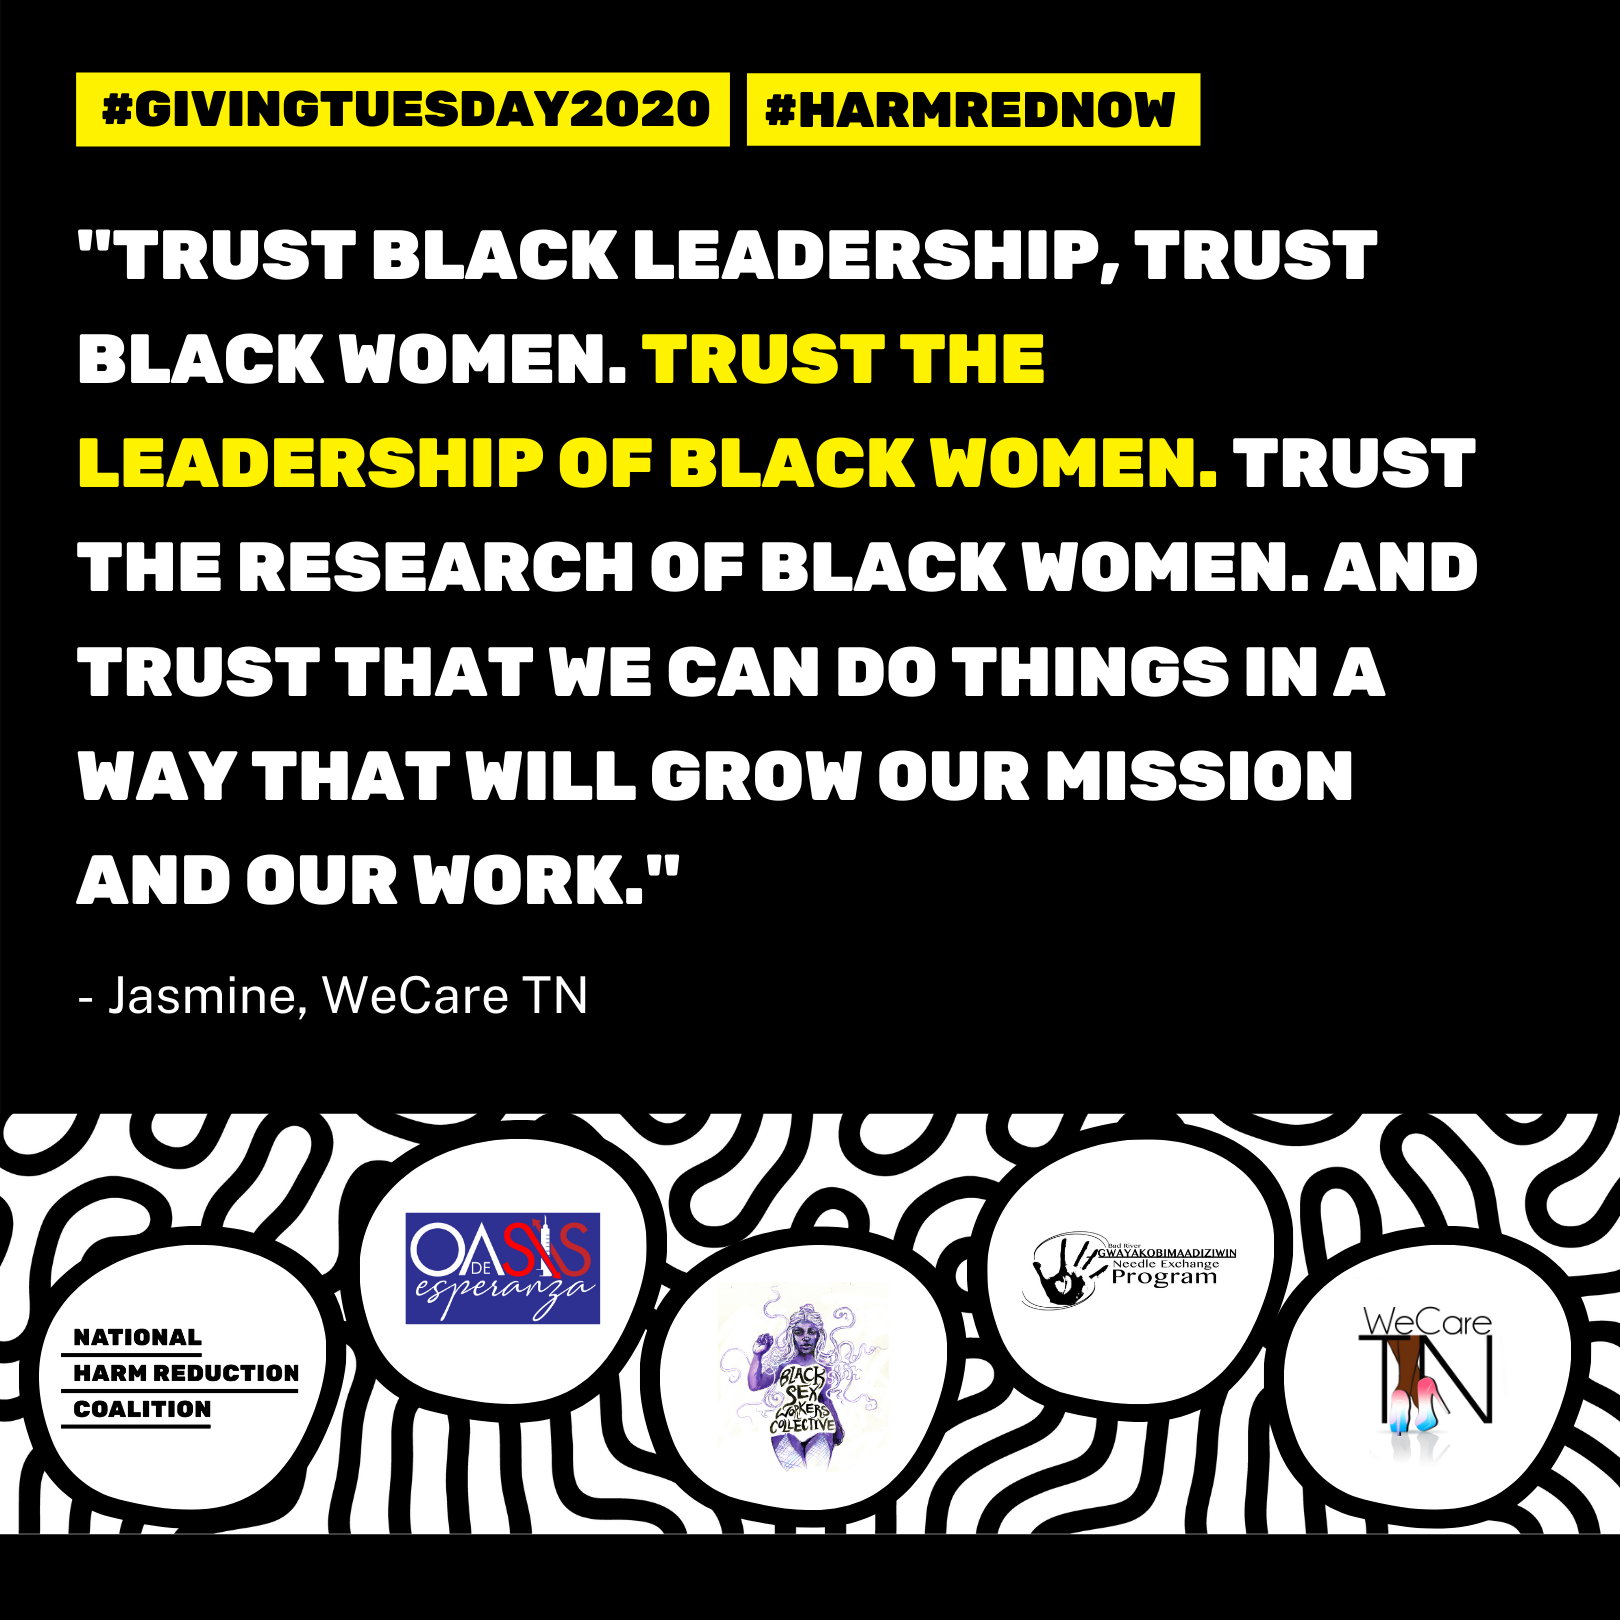 ''''Trust Black leadership, trust Black women. Trust the leadership of Black women. And trust that we can do things in a way that will grow our mission and our work.'''' -?Jasmine, WeCareTN